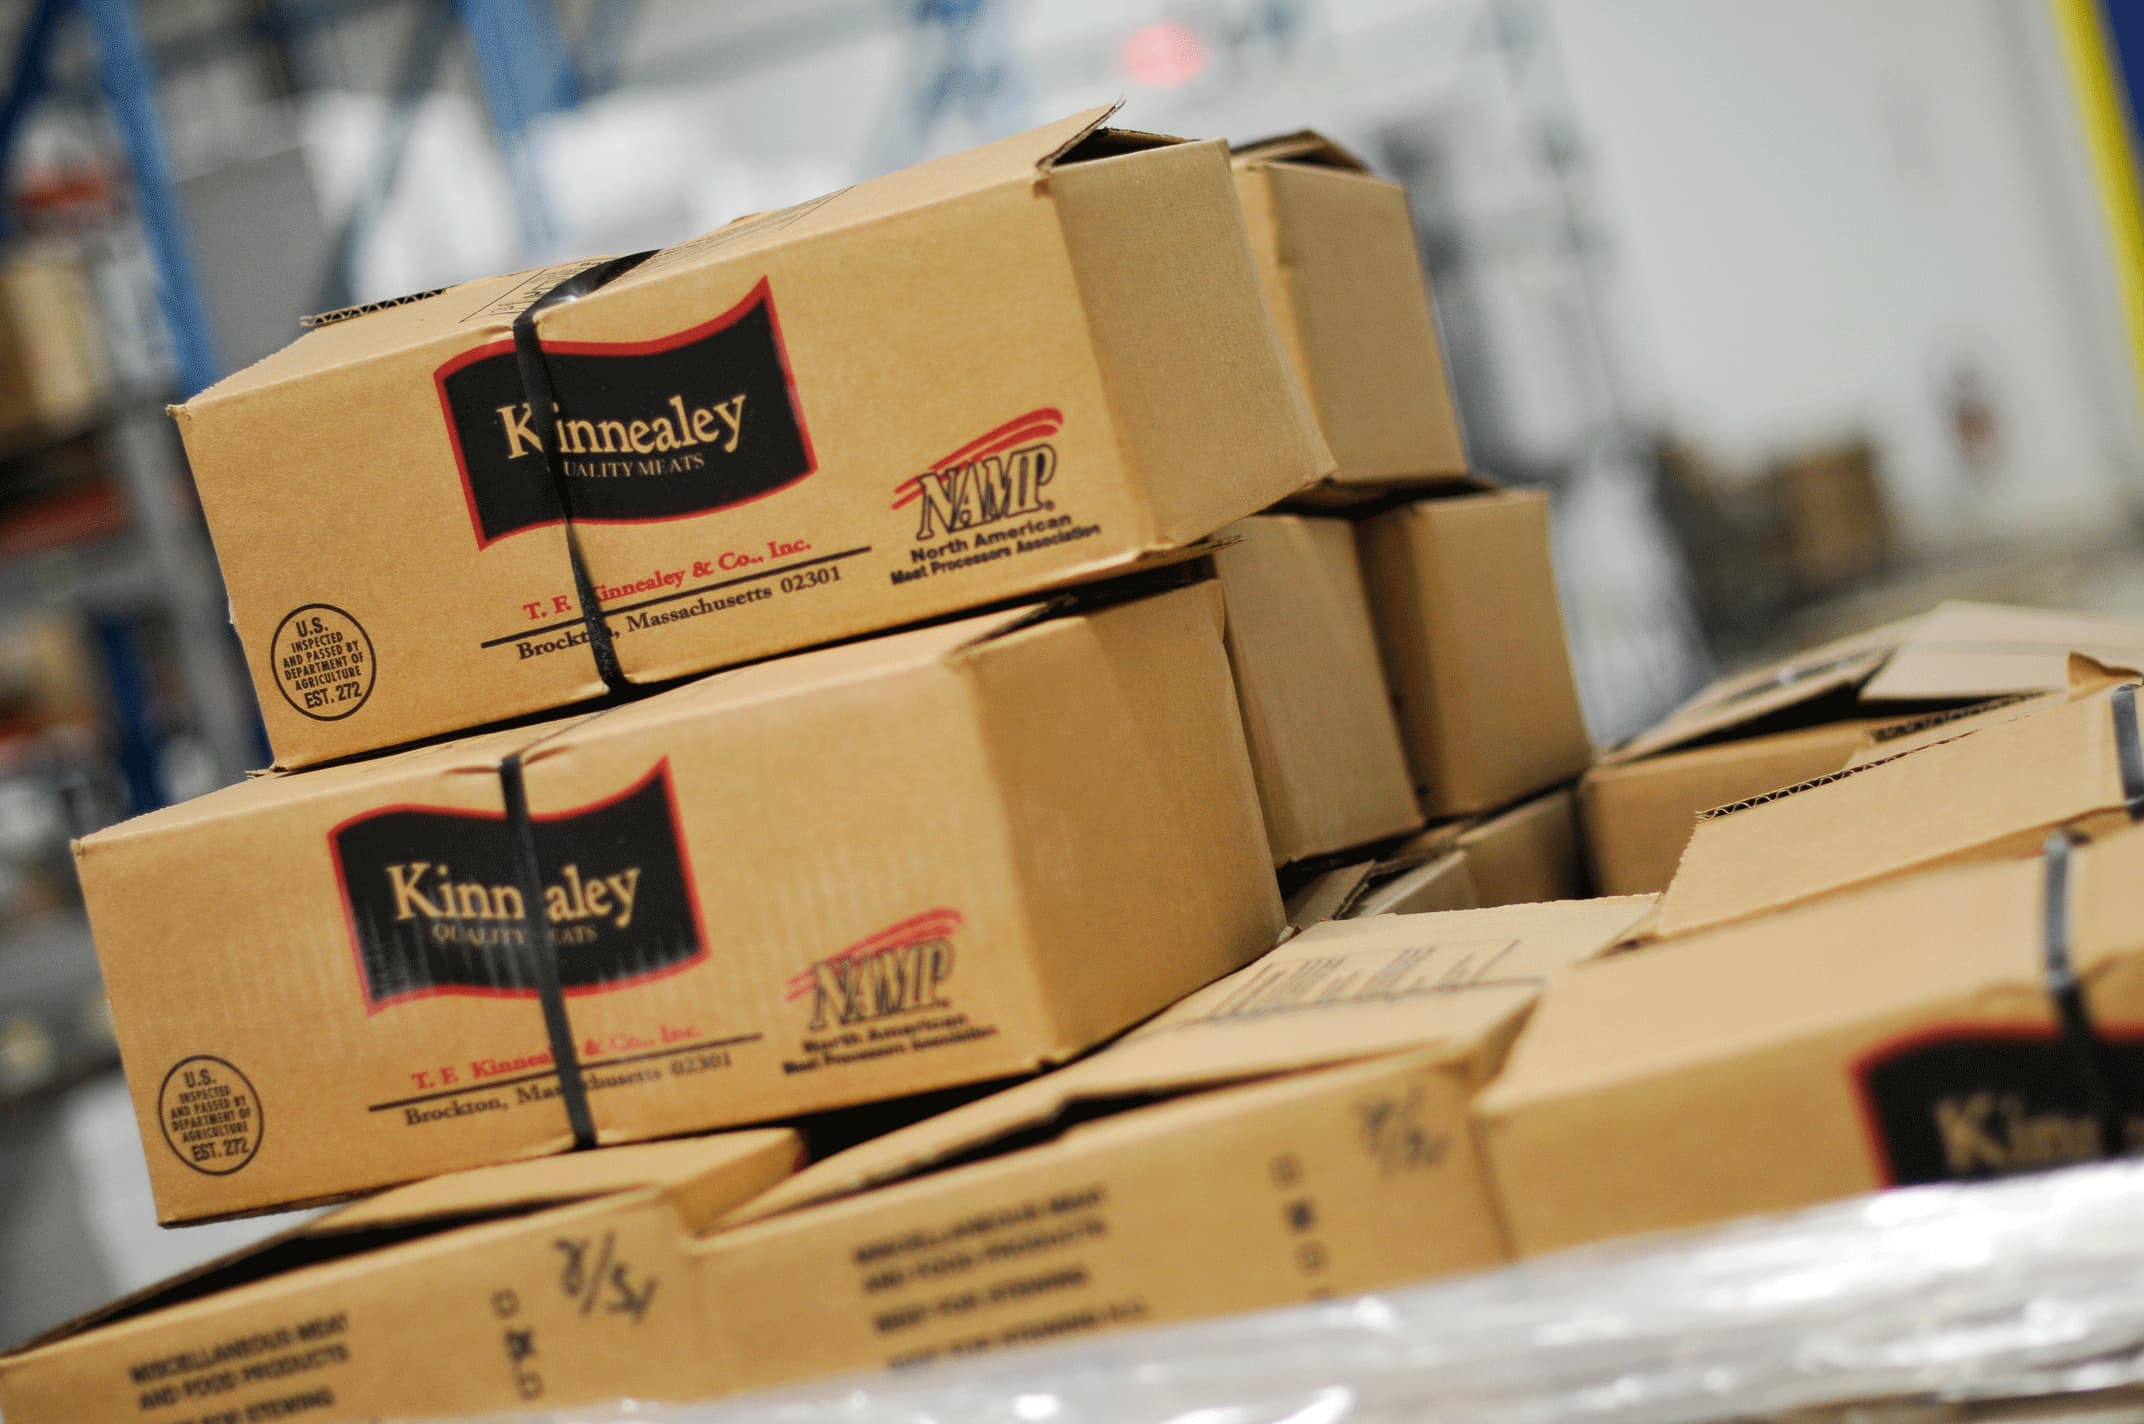 Several Kinnealey boxes stacked on top of each other in a warehouse.